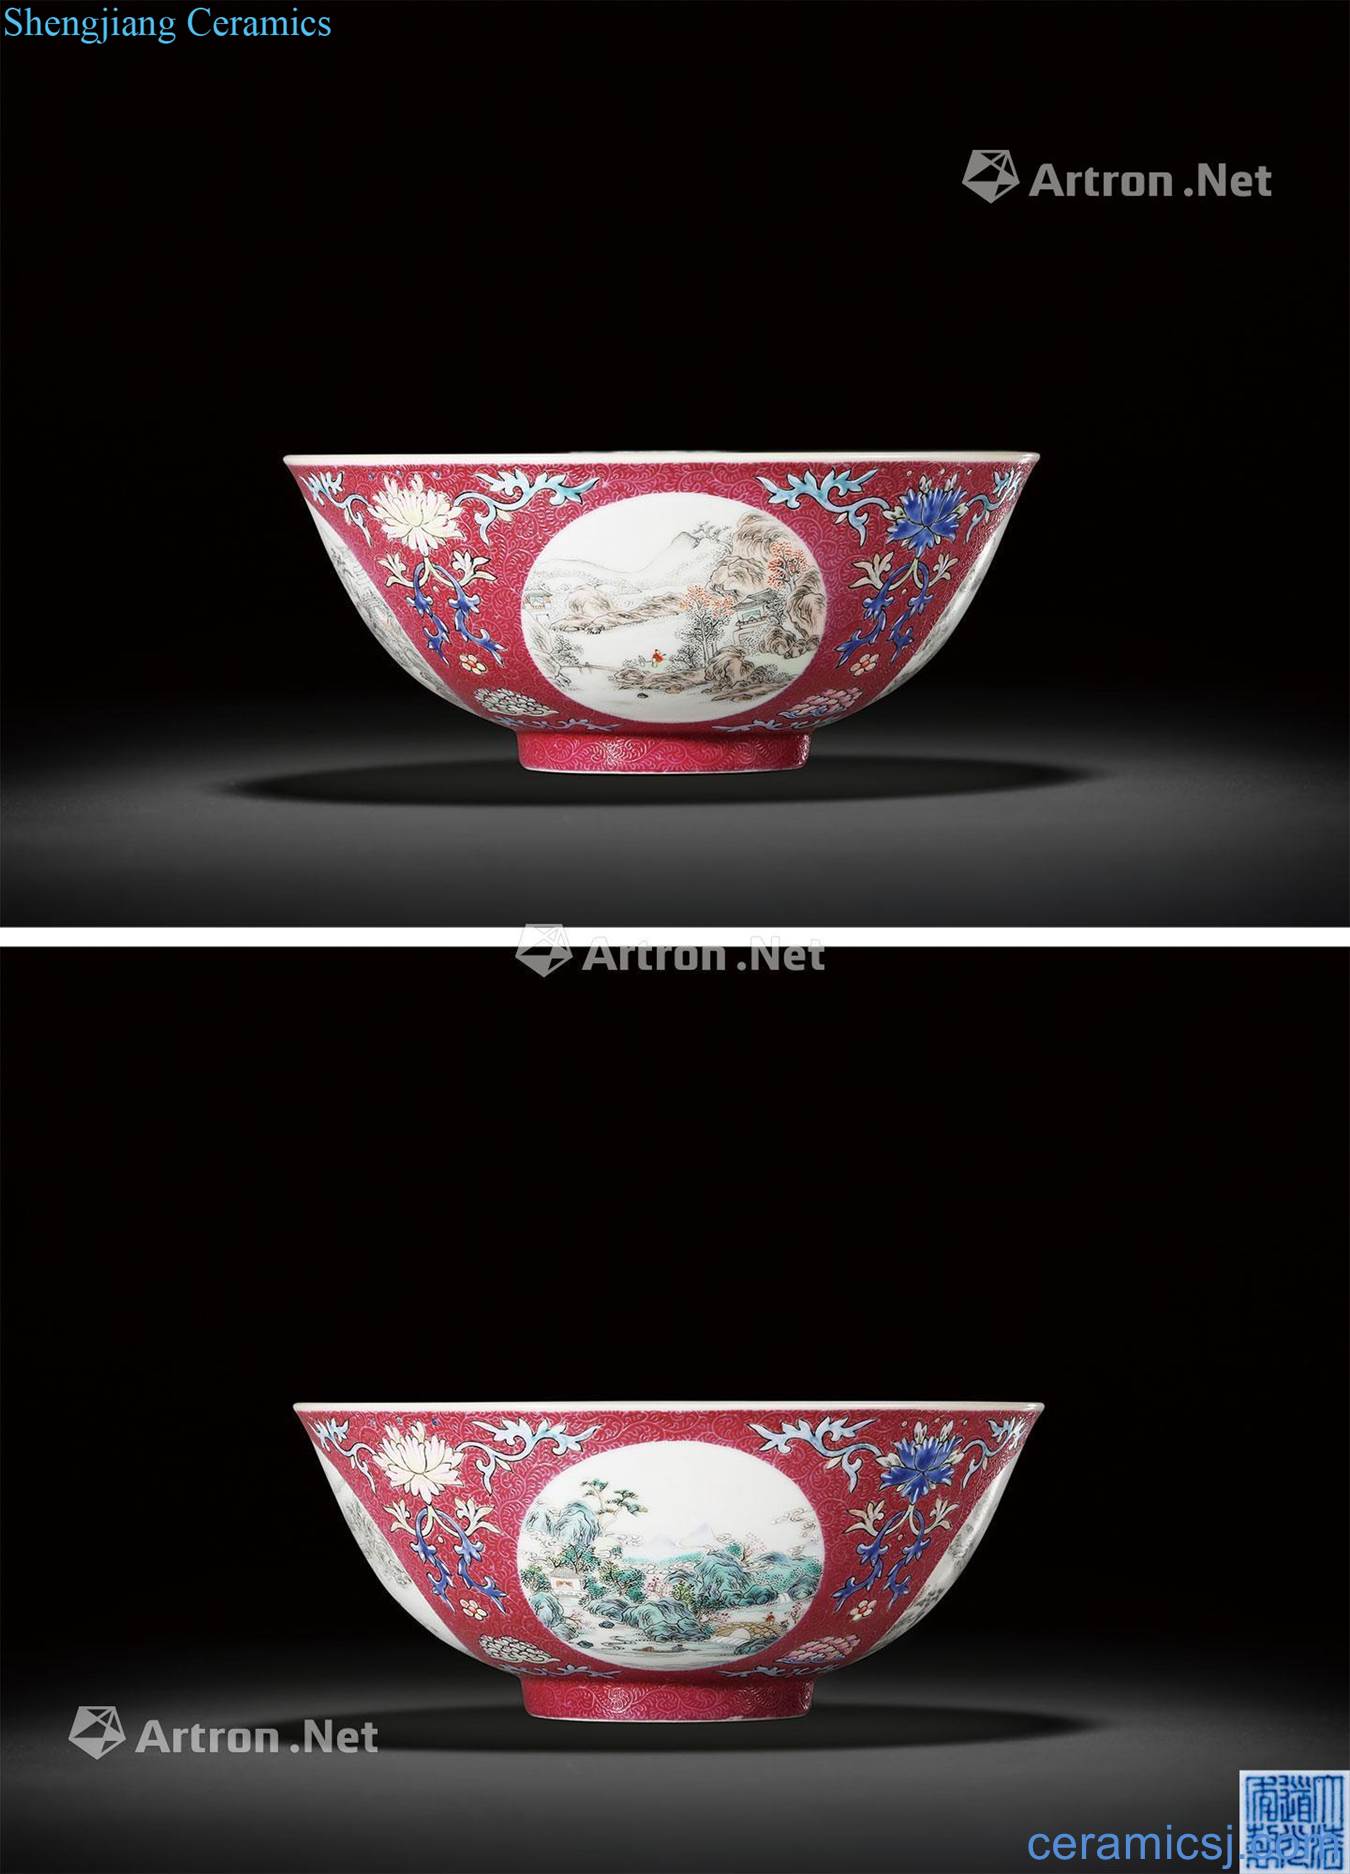 Qing daoguang Carmine in the rolling way far scenery figure bowl